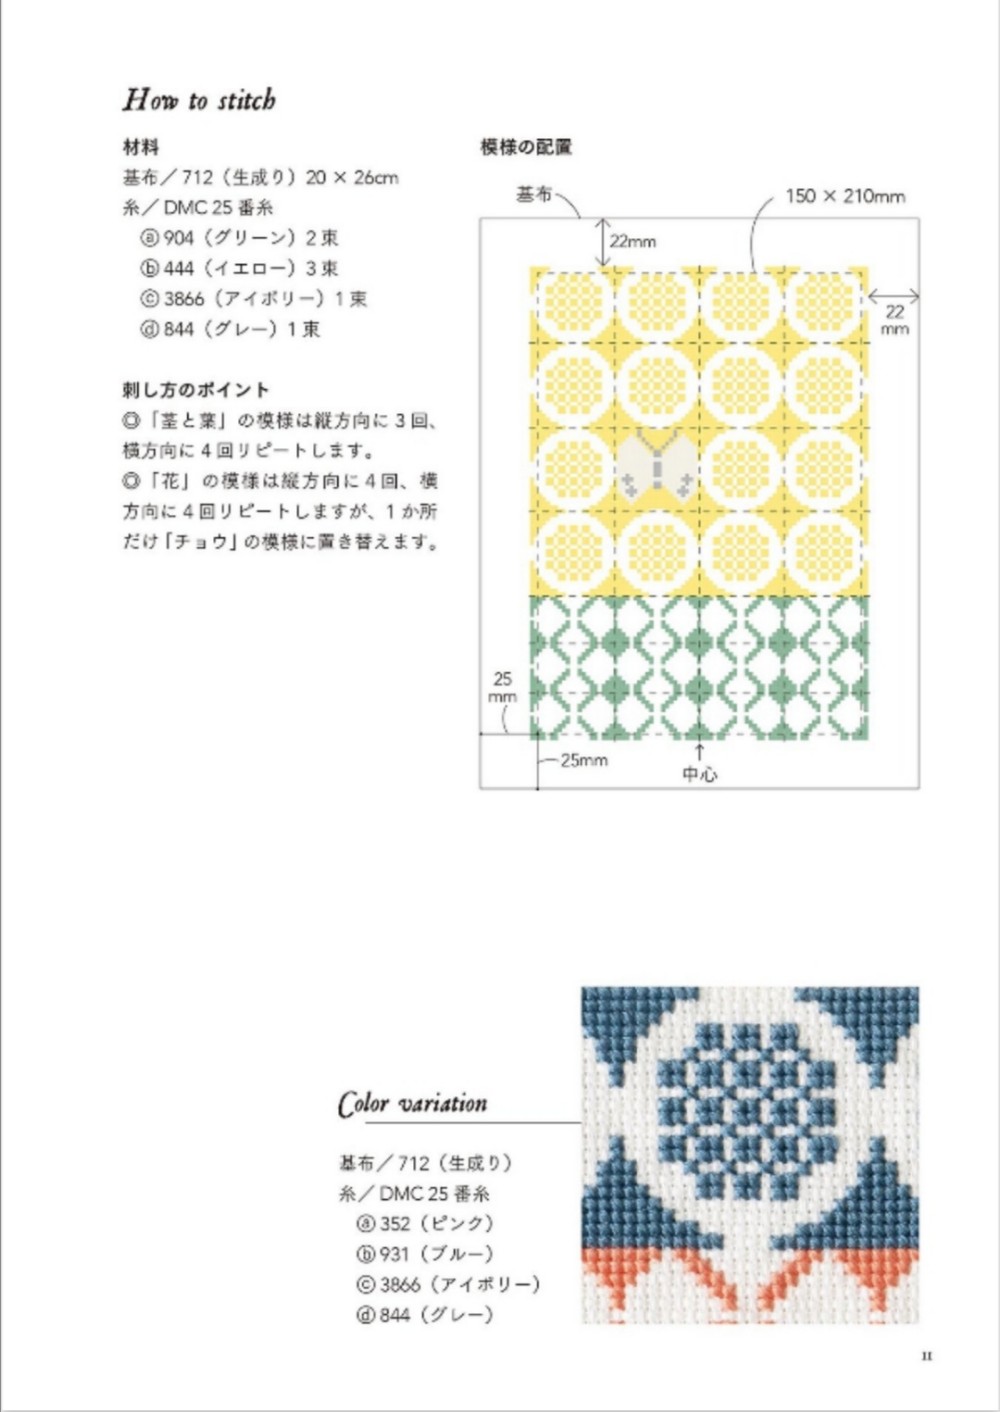 Ten to sen. Grid pattern: For embroidery and knitting. Dot and line pattern